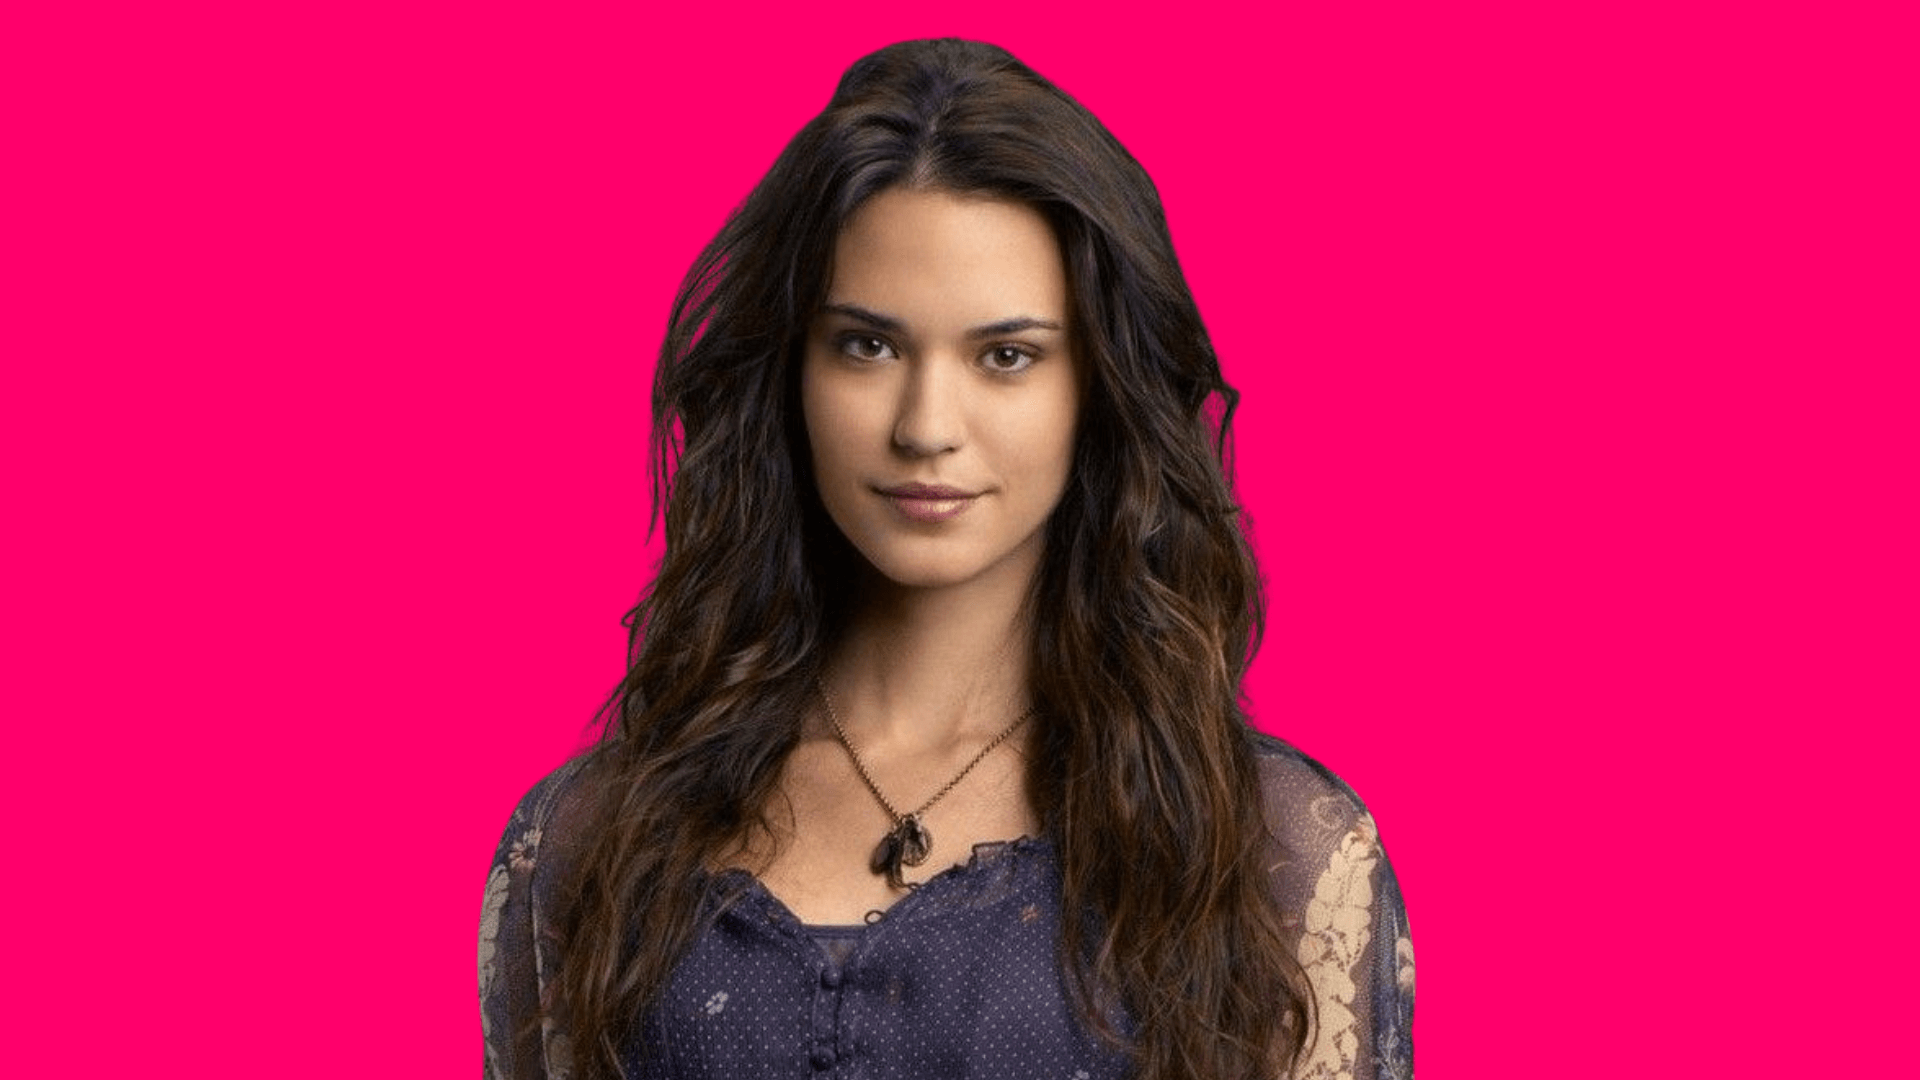 Odette Annable Biography, Wiki, Height, Weight, Age, Husband, Boyfriend, Family, Net Worth, Career & Many More